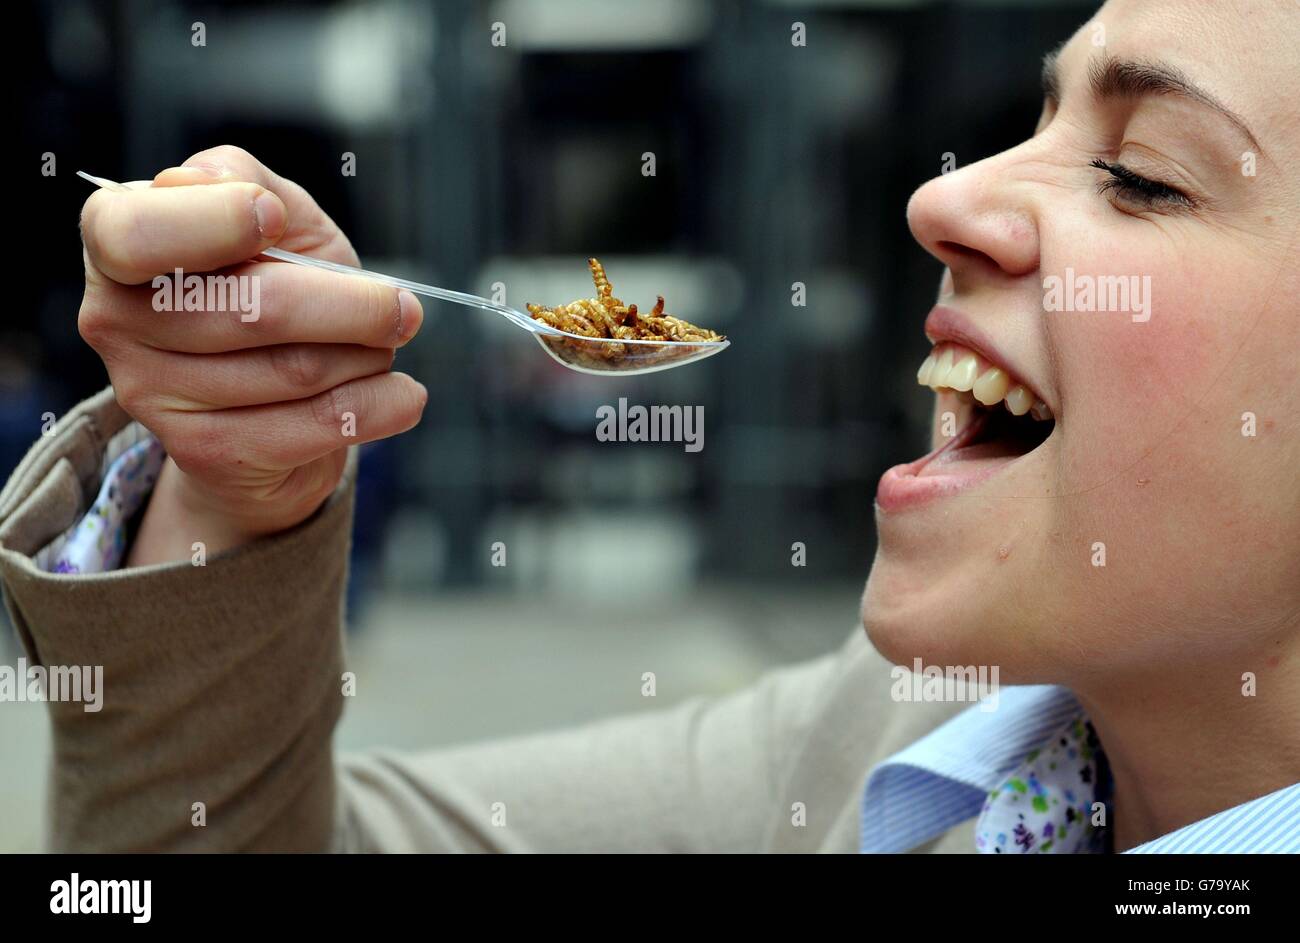 Julia Avdiu tries a spoonful of plain roasted meal worms at Rentokil's Pop-up Pestaurant at One New Change, central London. Stock Photo